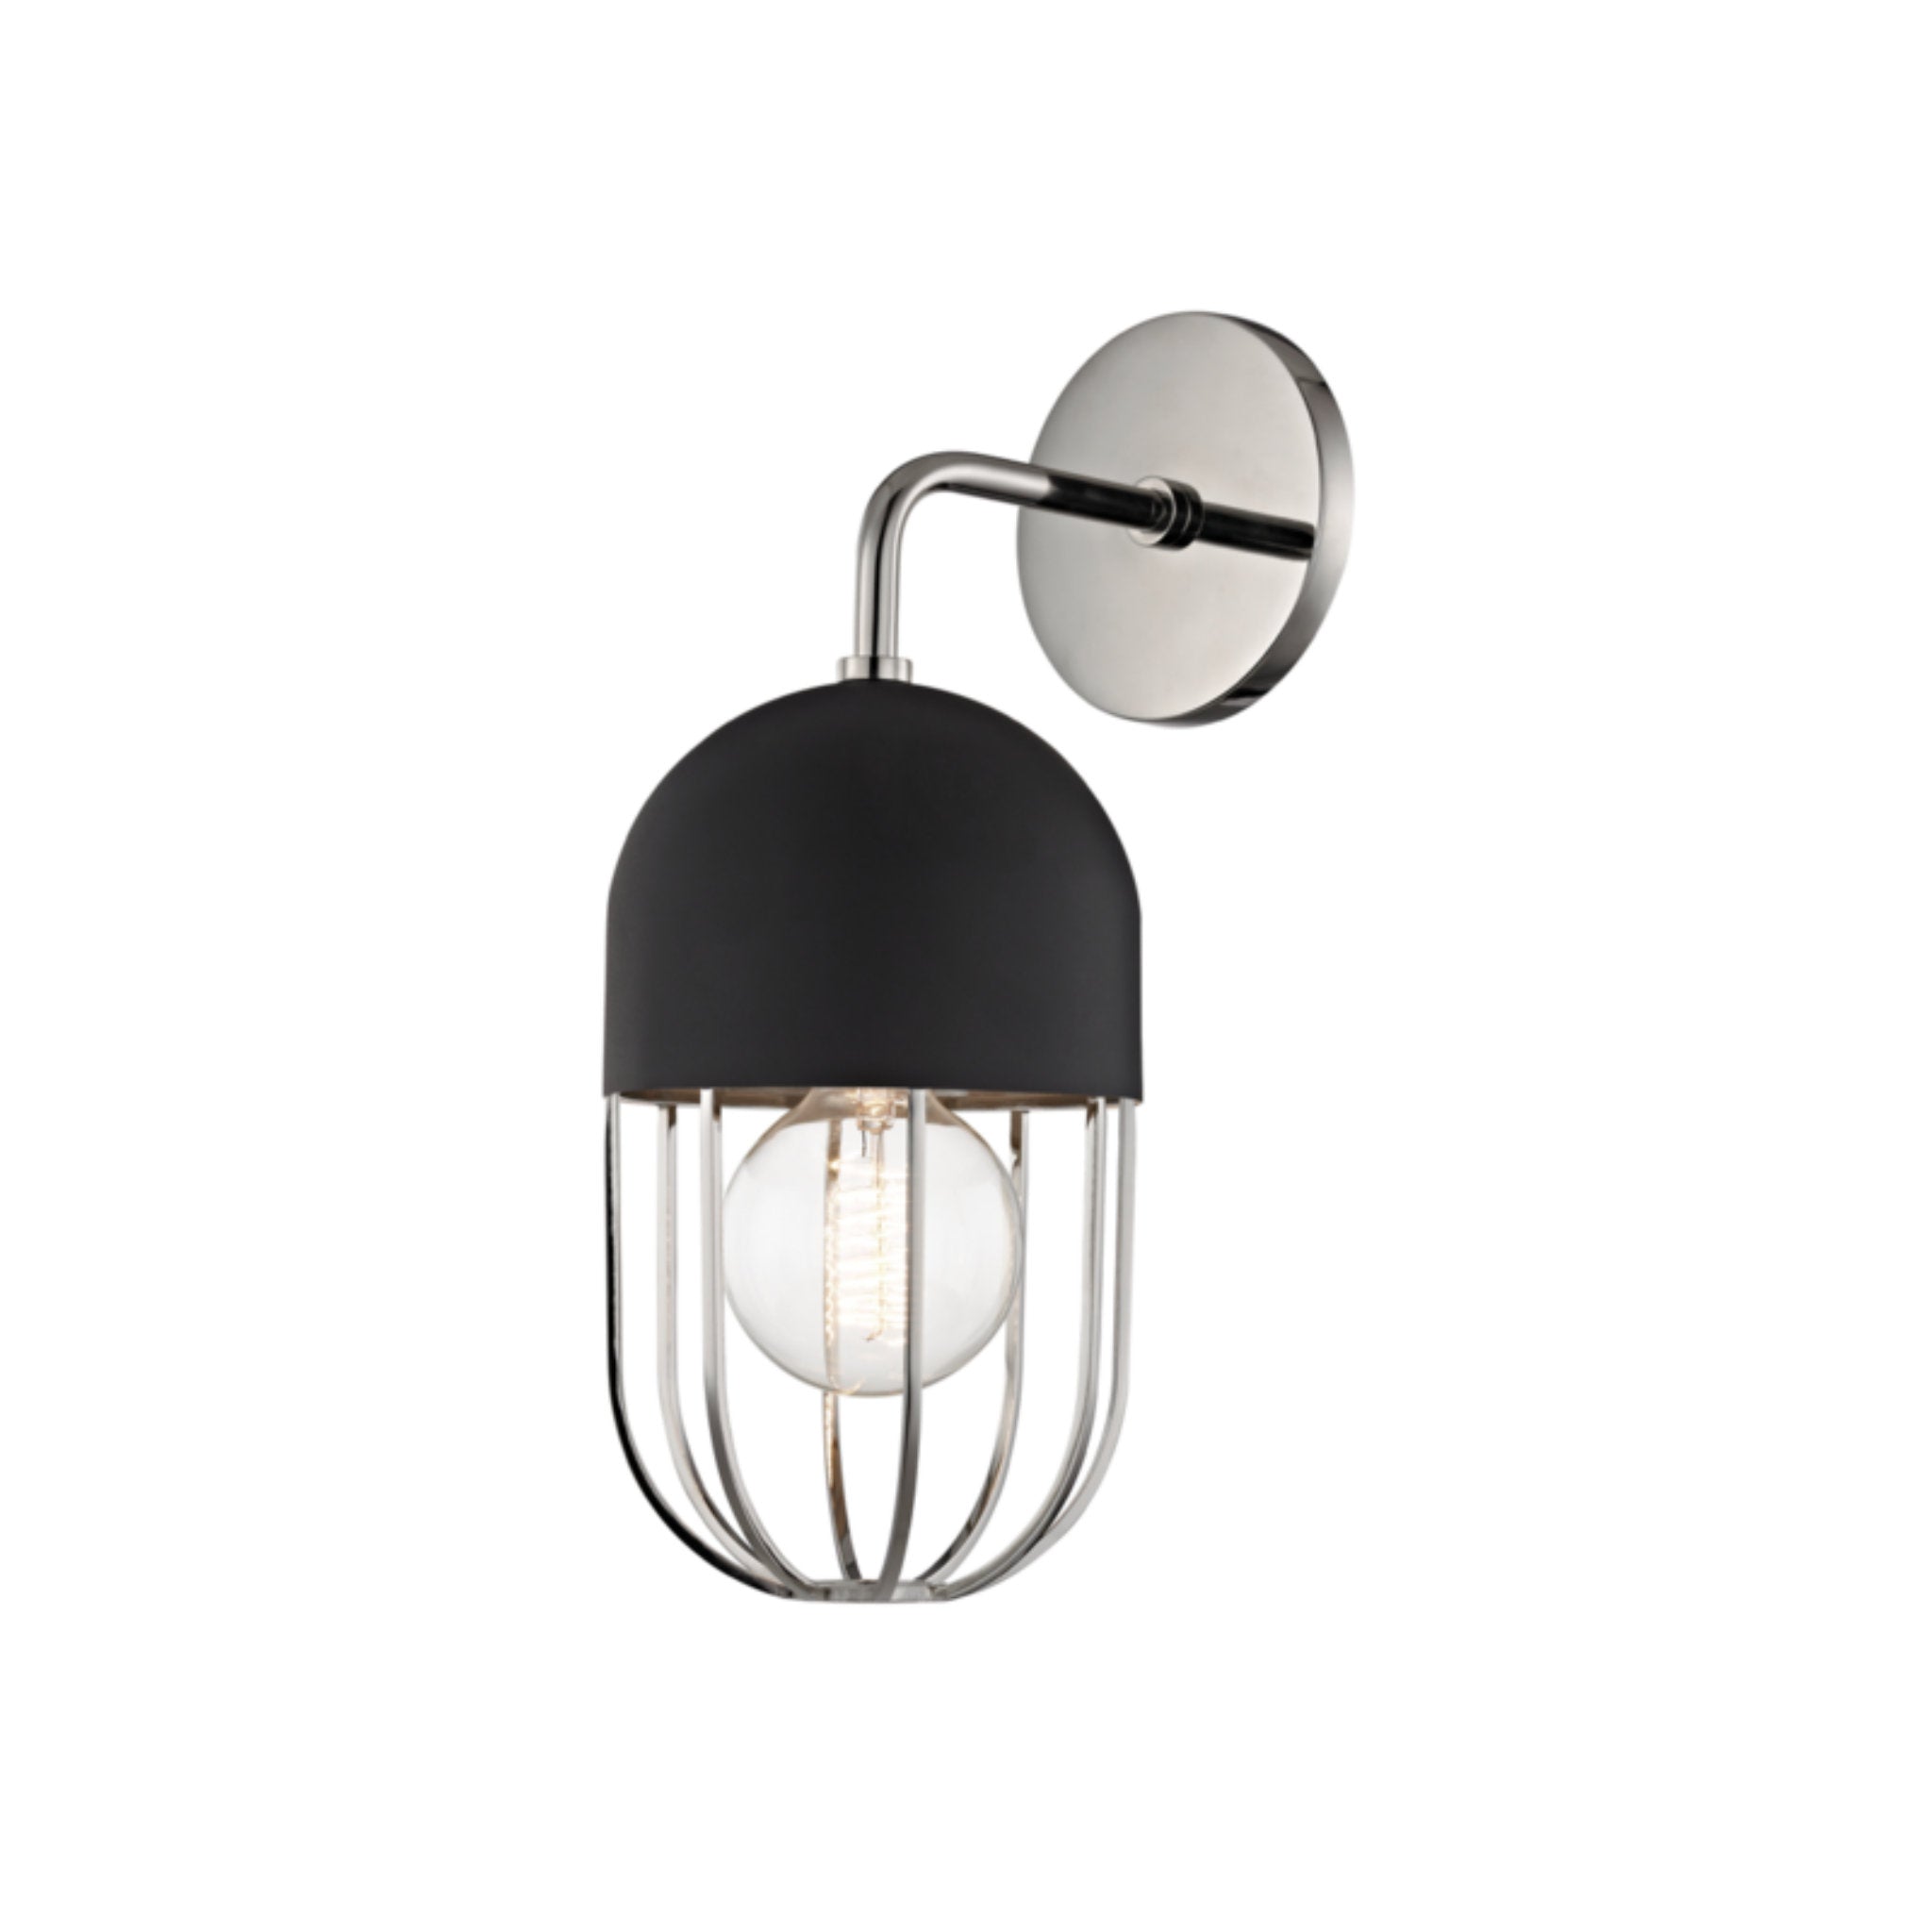 Haley 1-Light Wall Sconce in Polished Nickel/Black